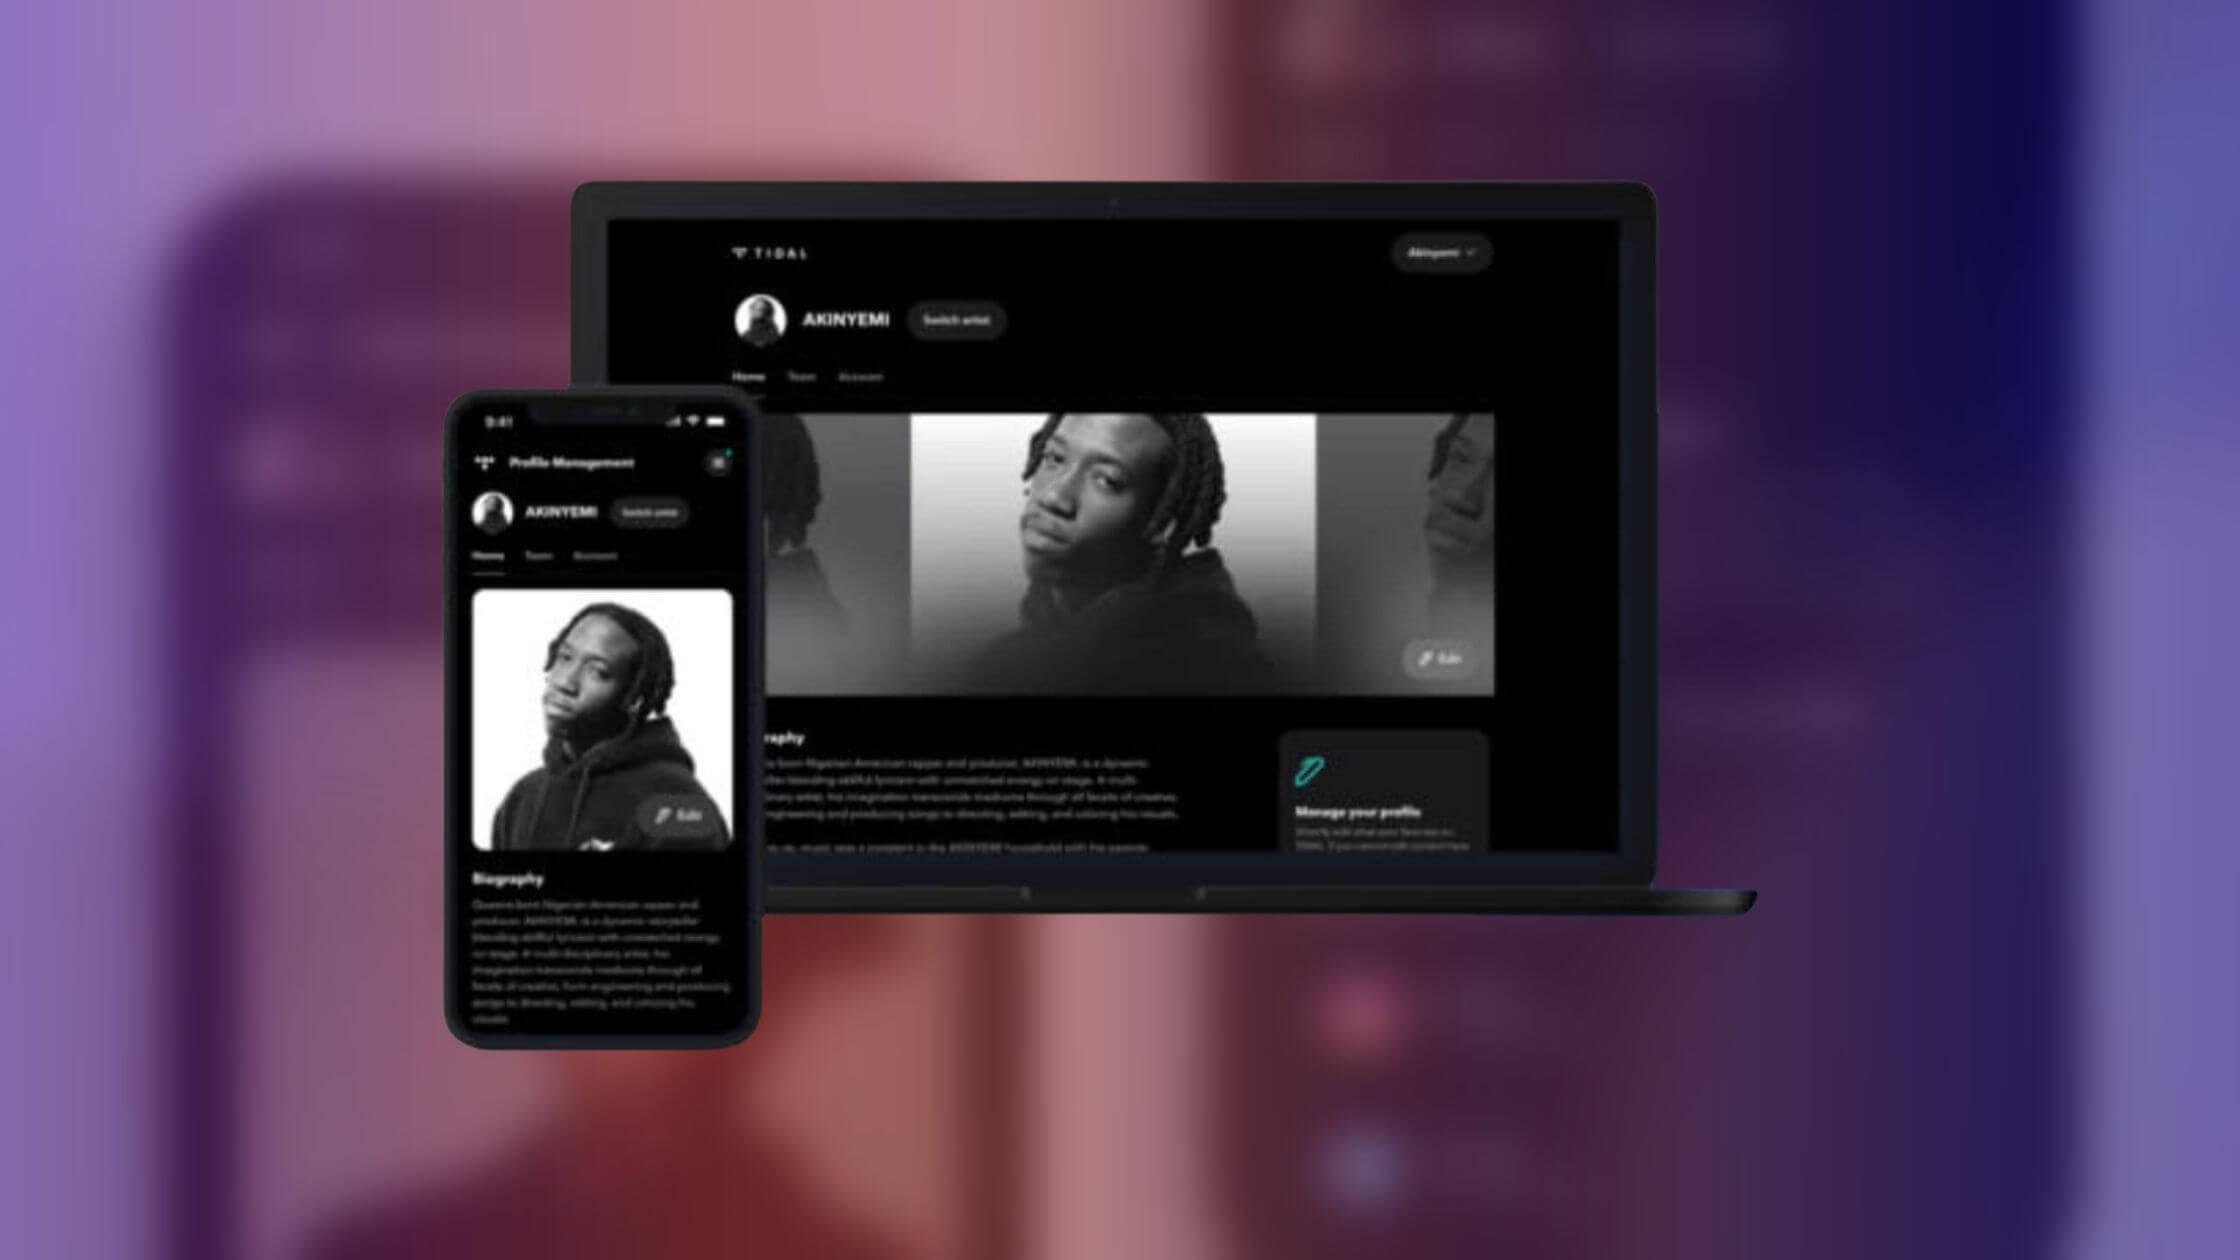 TIDAL Artist Home gives artists creative control over their profiles on TIDAL